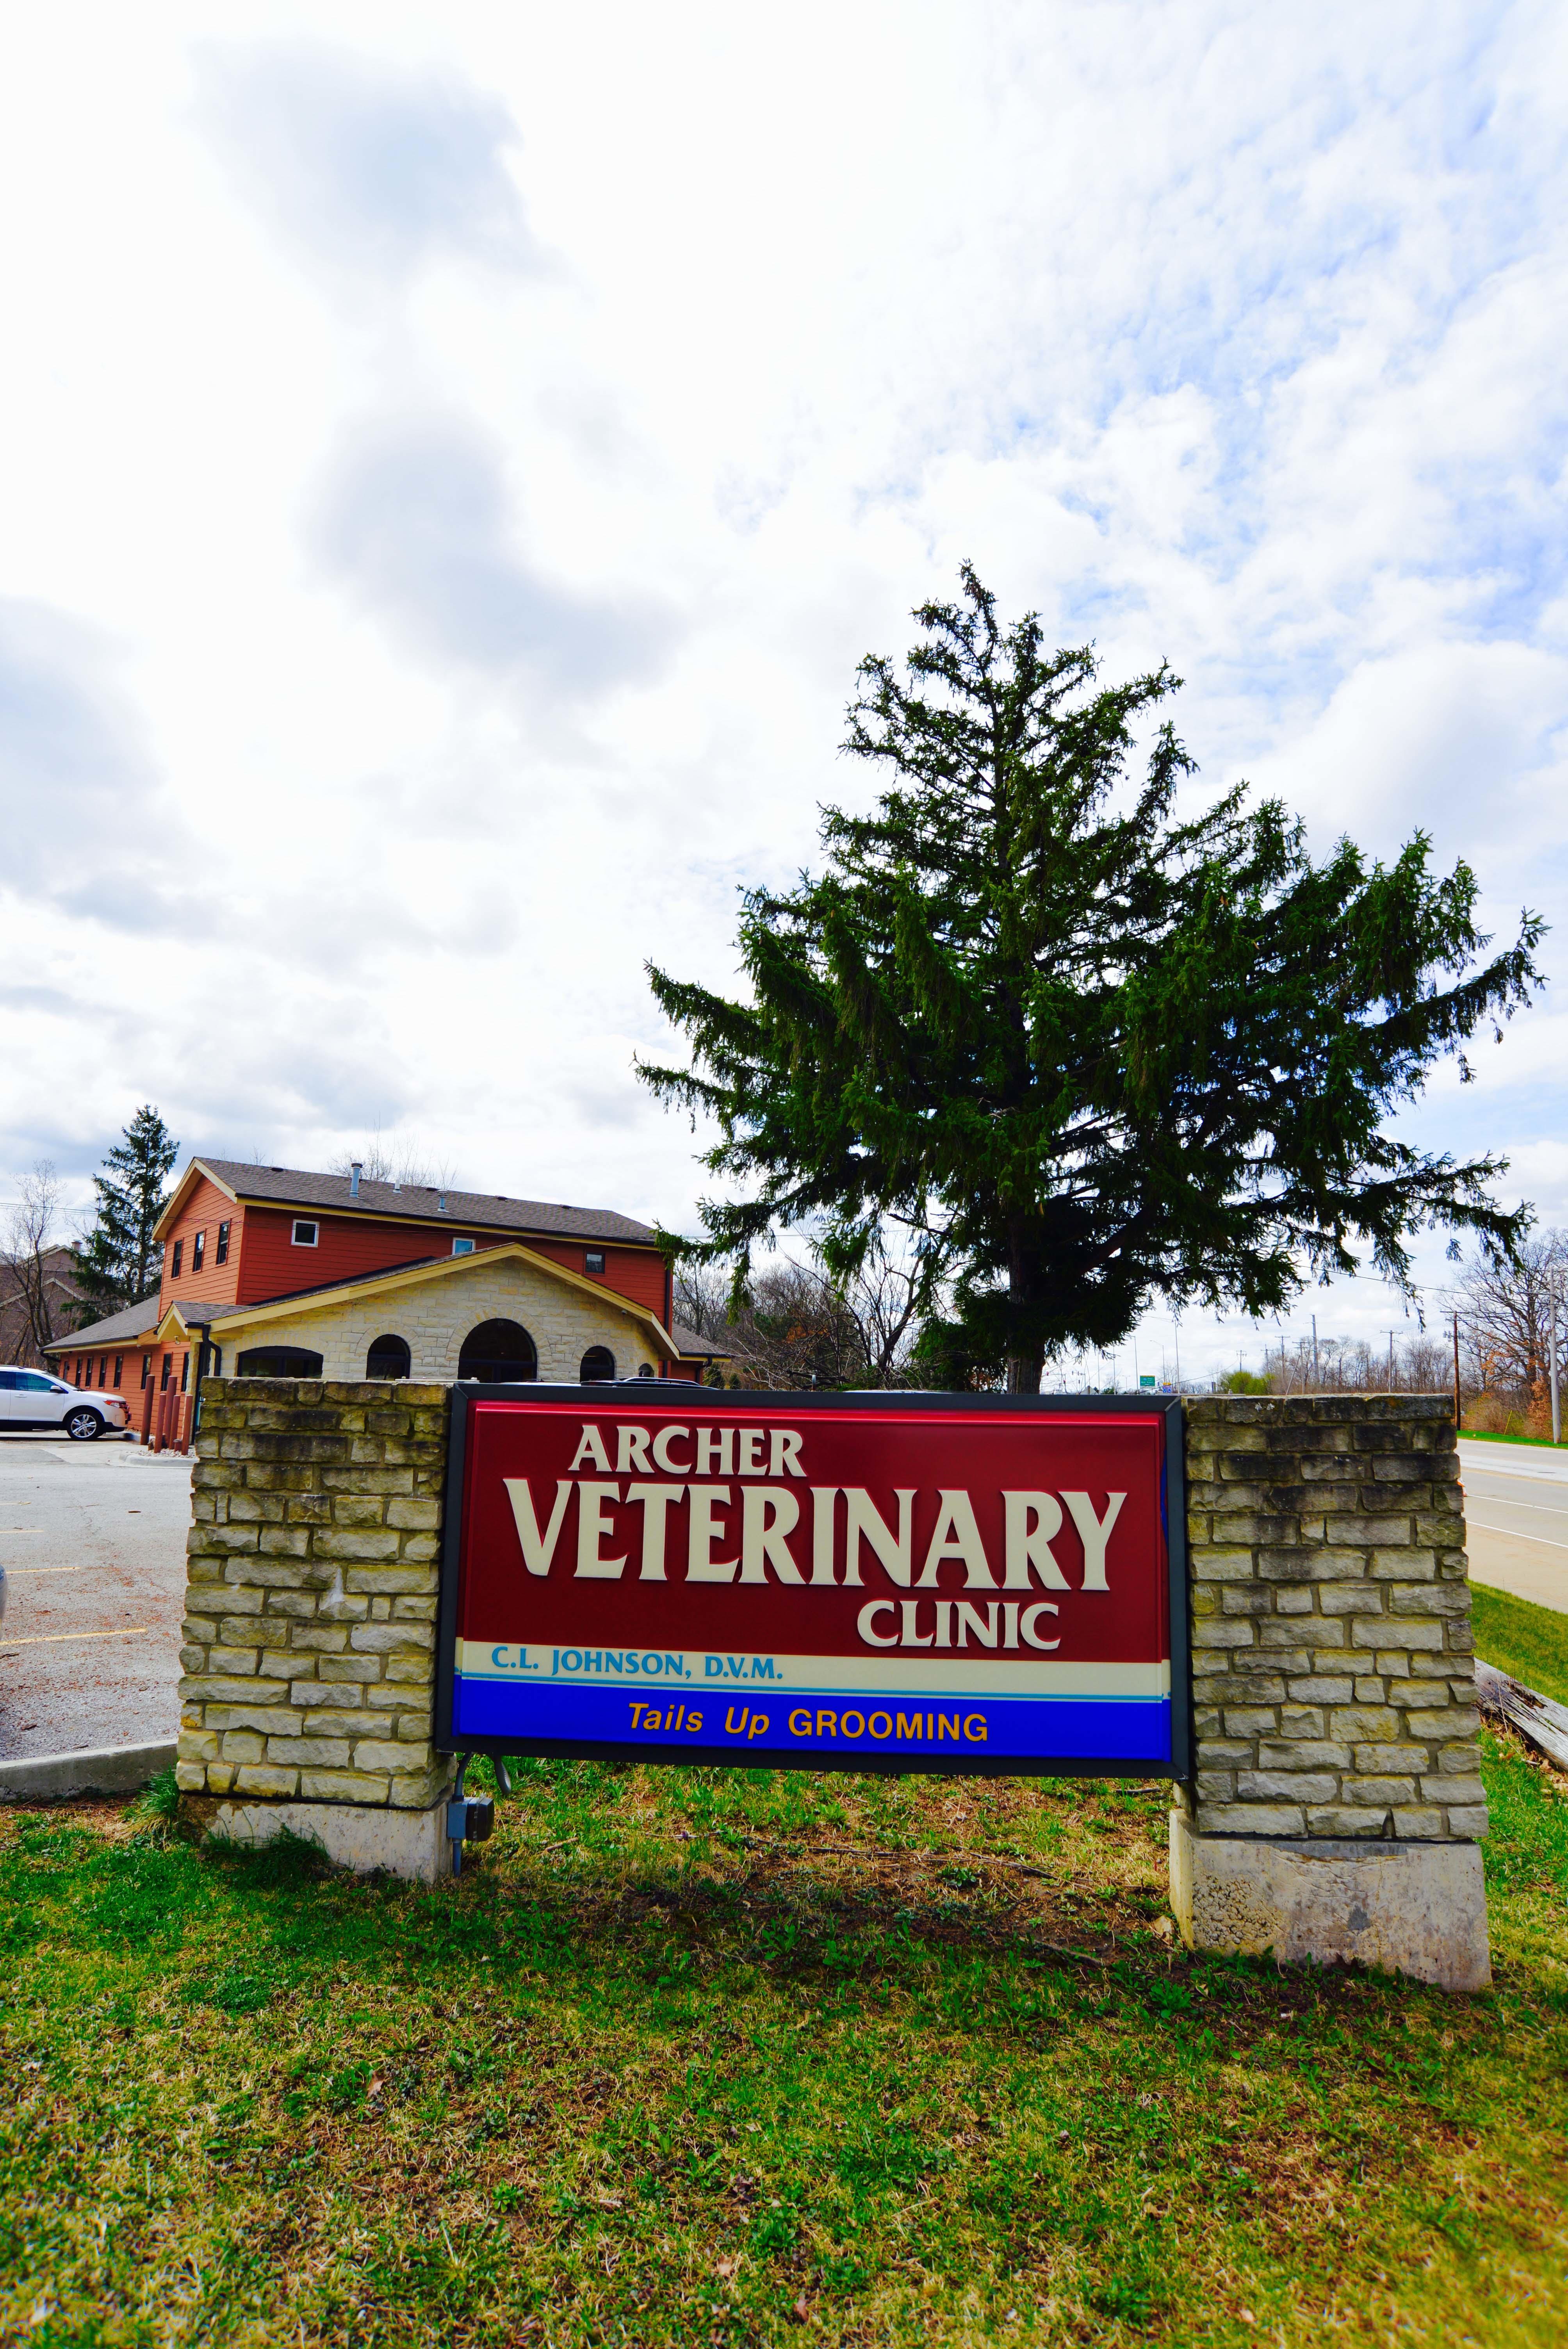 Welcome to Archer Veterinary Clinic!